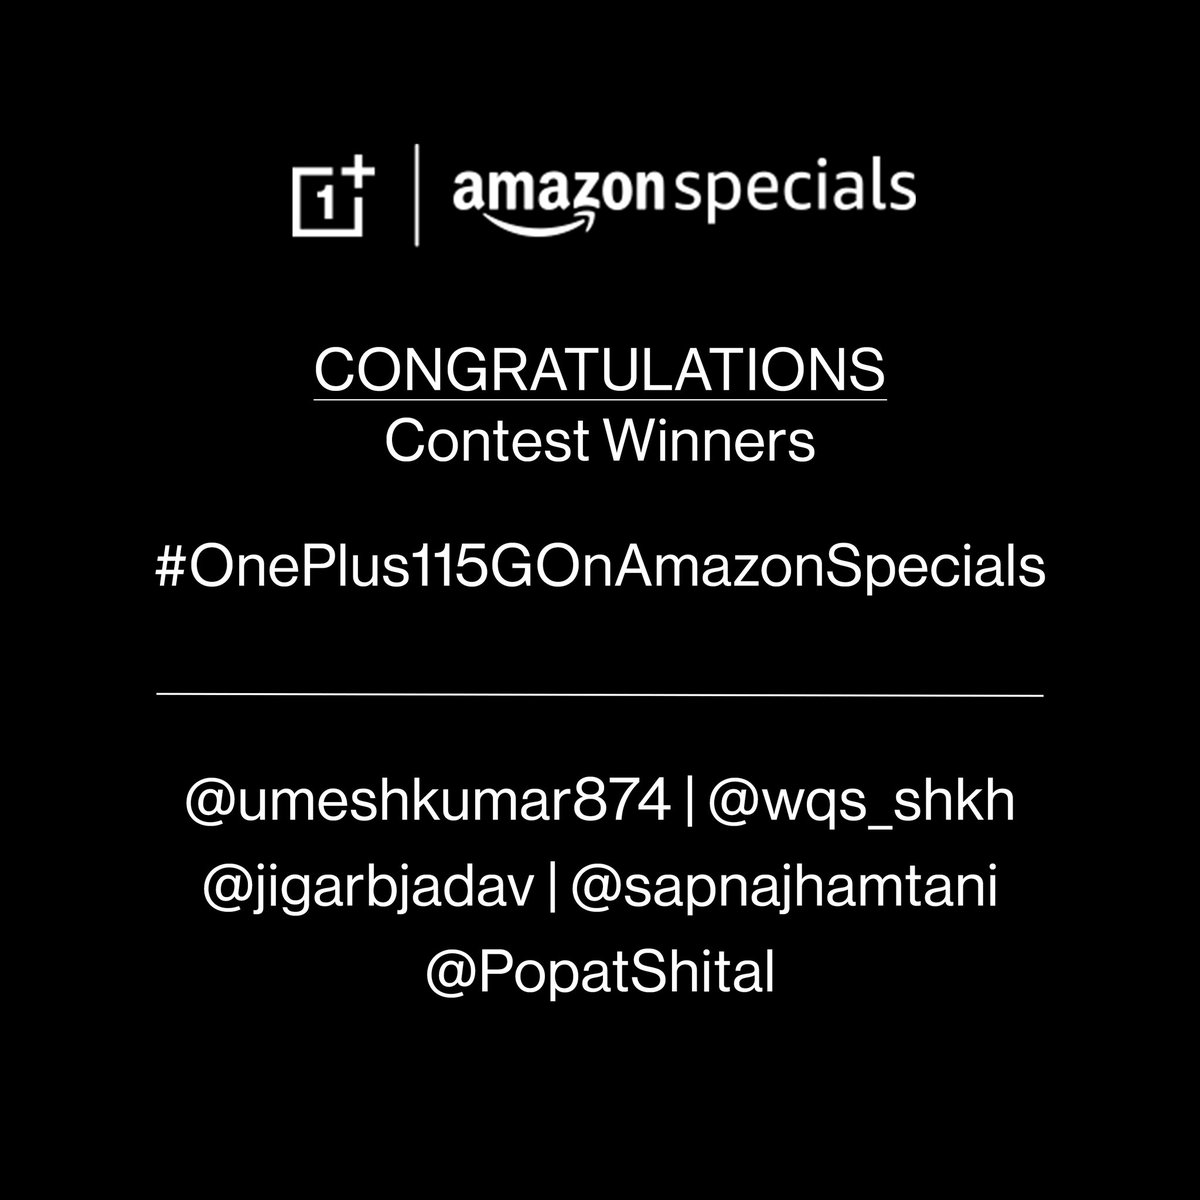 I was the winner but haven't got my price yet But everybody apart from me has received it. Look into this matter @AmazonHelp @amazonIN @amazon . Repost it - @umeshkumar874 @wqs_shkh @jigarbjadav @PopatShital